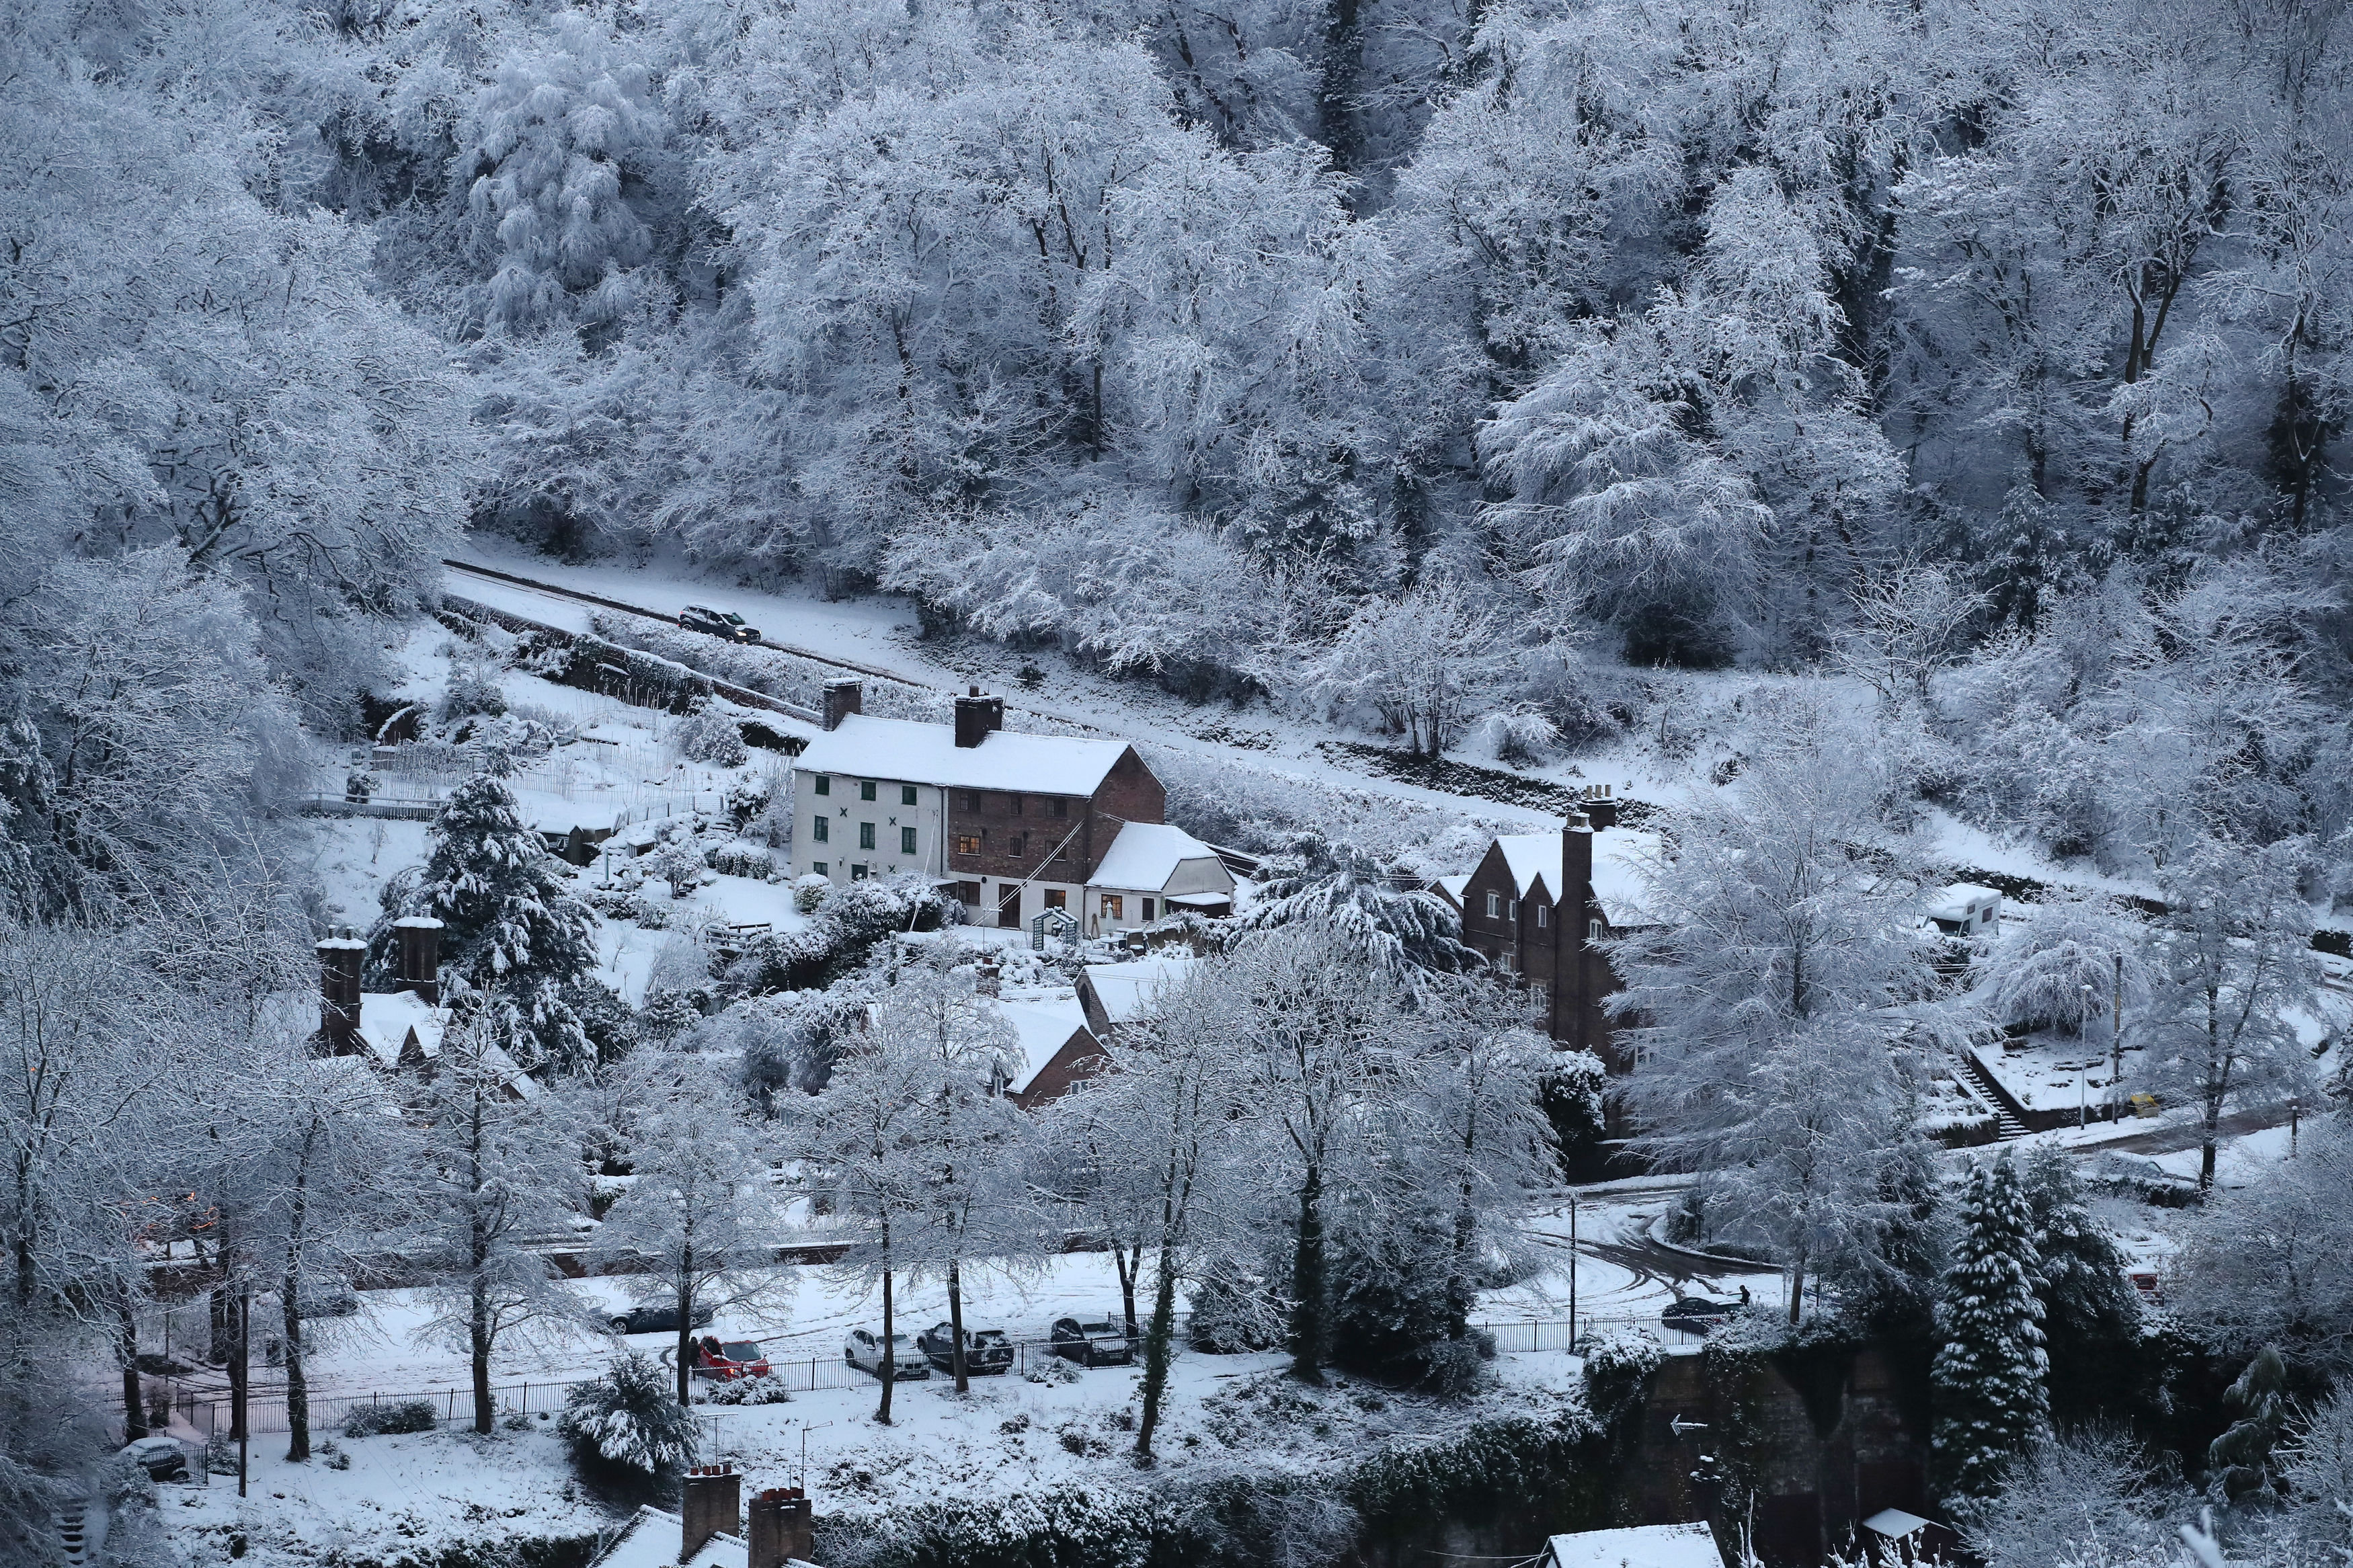 Ironbridge in Shropshire covered in snow on Friday morning